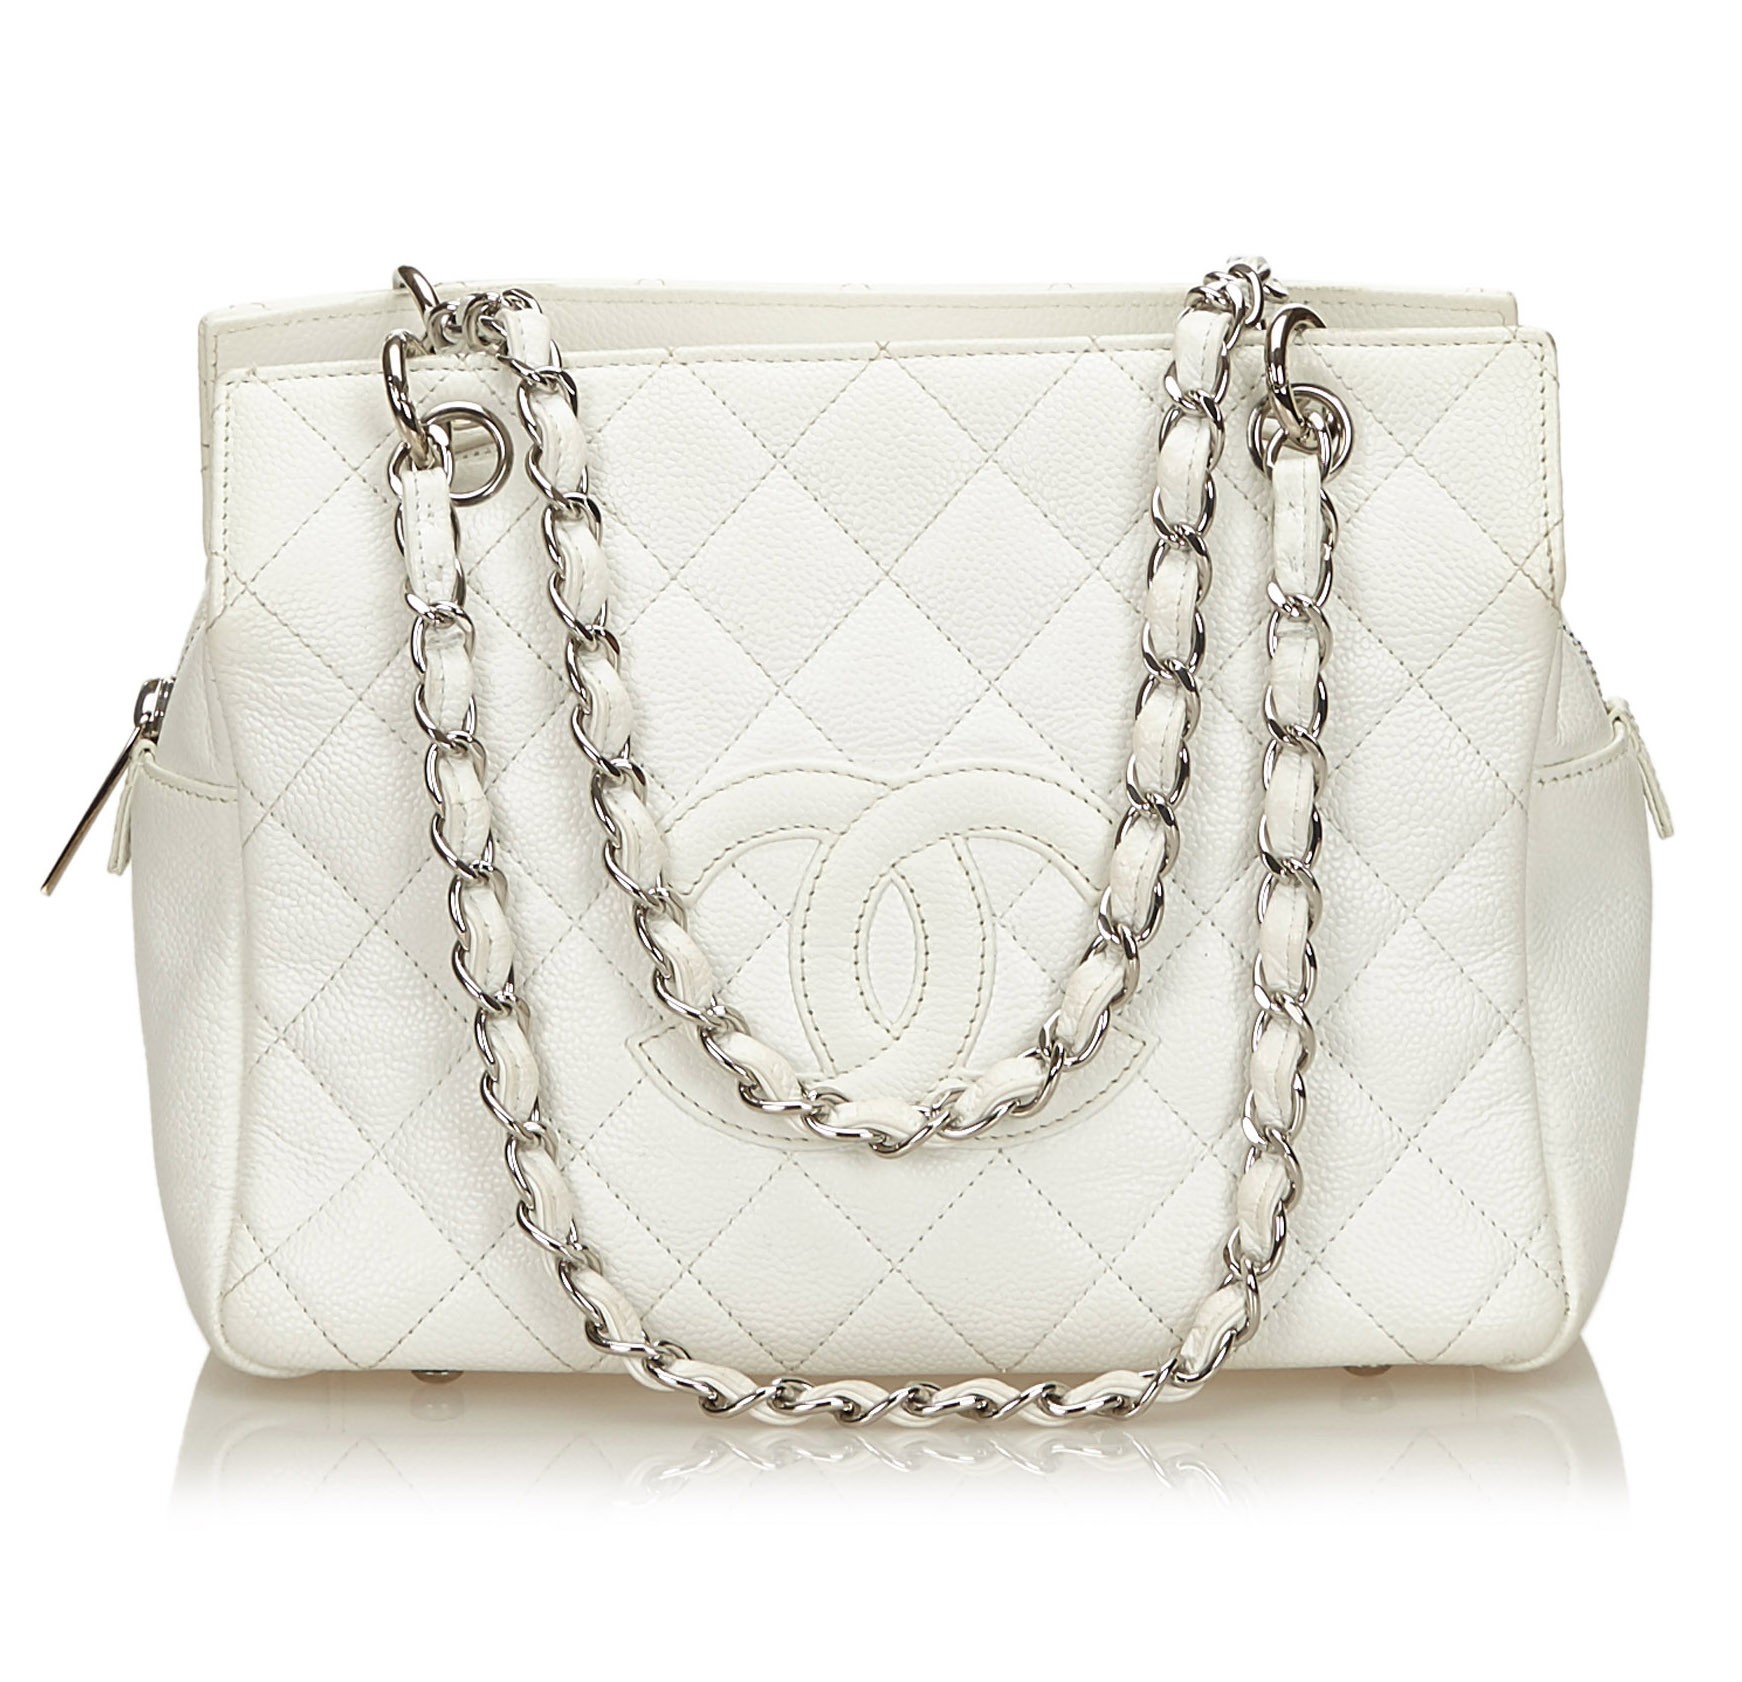 Chanel Shopping Tote, White Chevron with Gold Hardware, Preowned in Dustbag  WA001